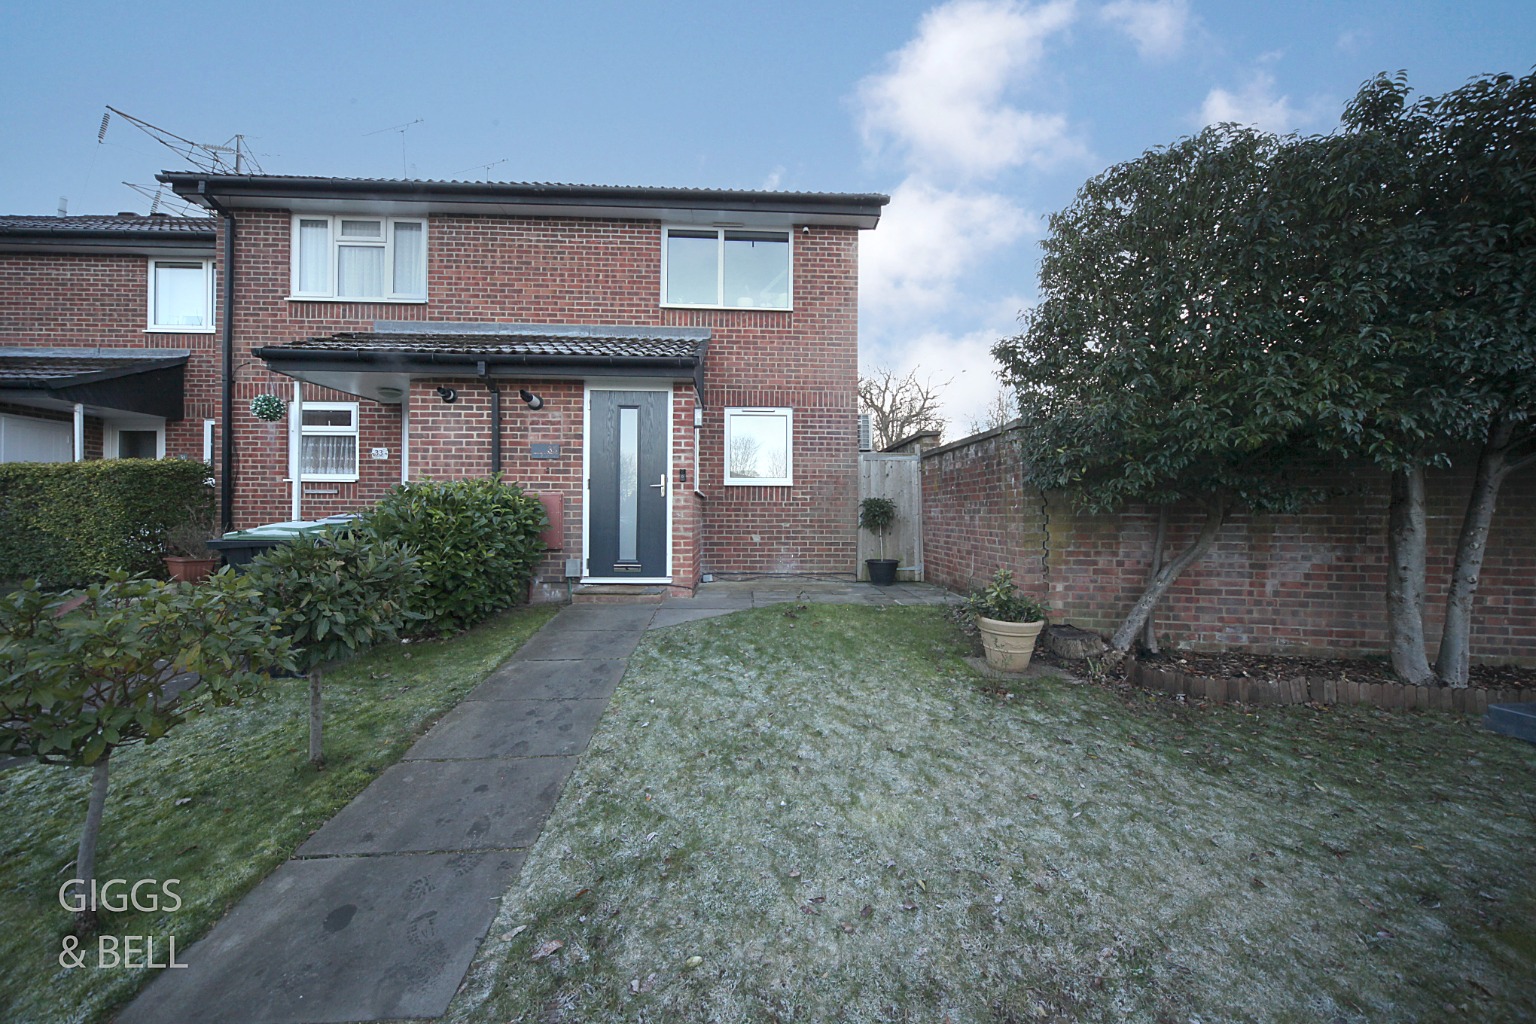 3 bed end of terrace house for sale in Oregon Way, Luton, LU3 